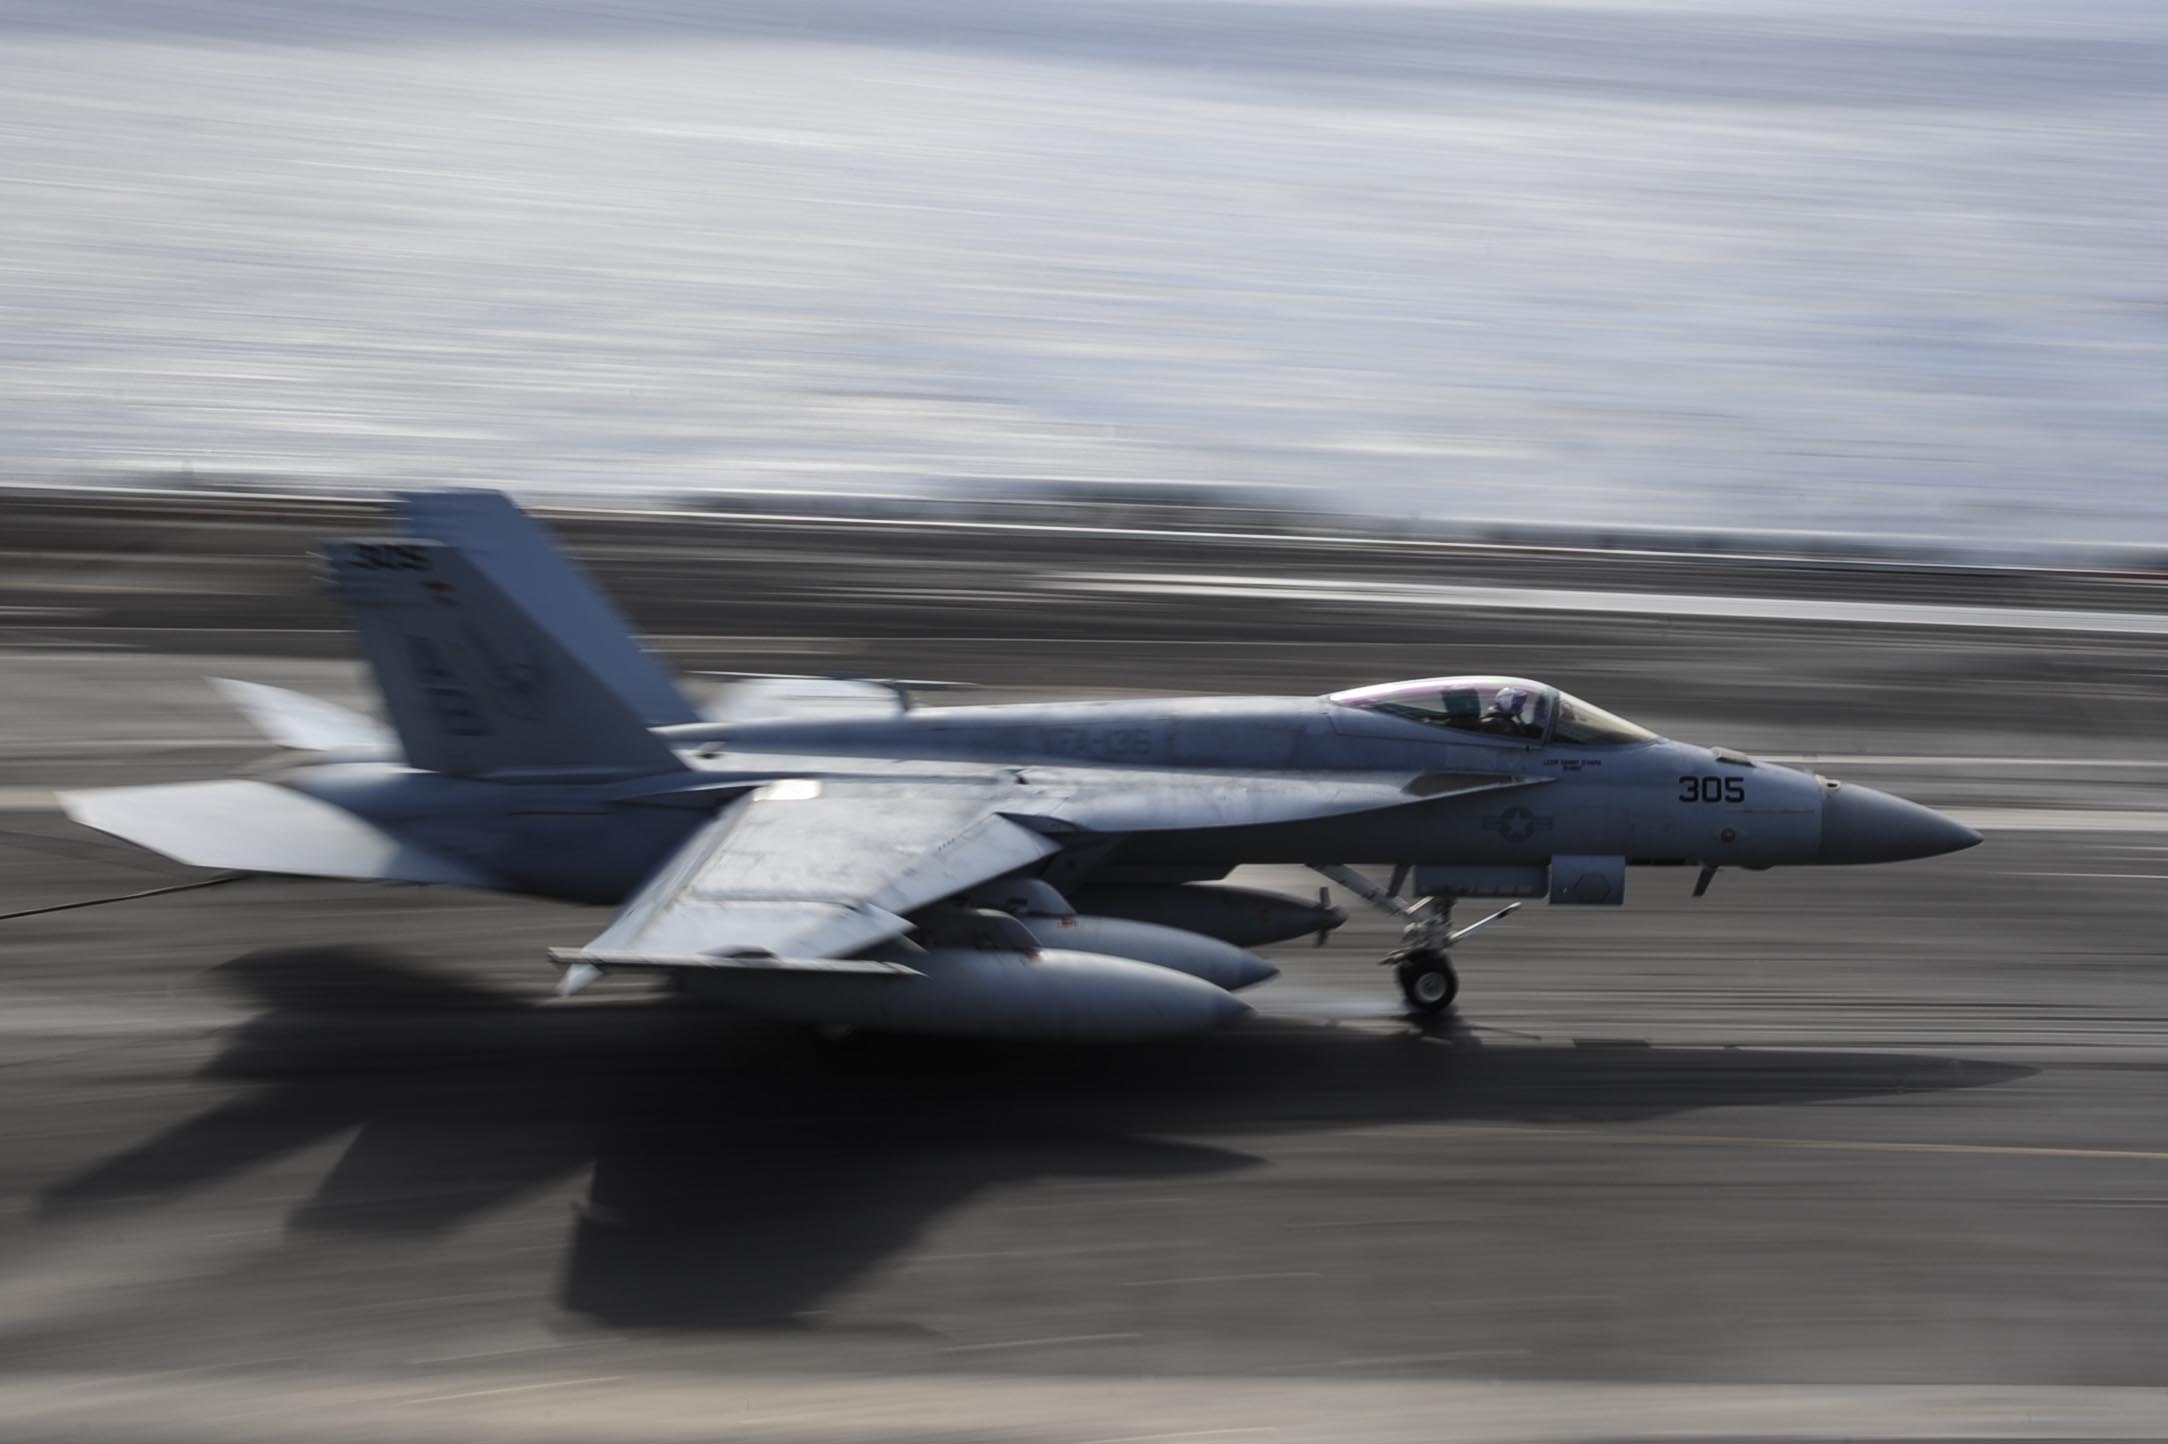 F/A-18E Super Hornet assigned to the Knighthawks of Strike Fighter Attack Squadron (VFA) 136 lands on the flight deck of the Nimitz-class aircraft carrier USS Theodore Roosevelt (CVN 71) on Jan. 30, 2015. US Navy Photo